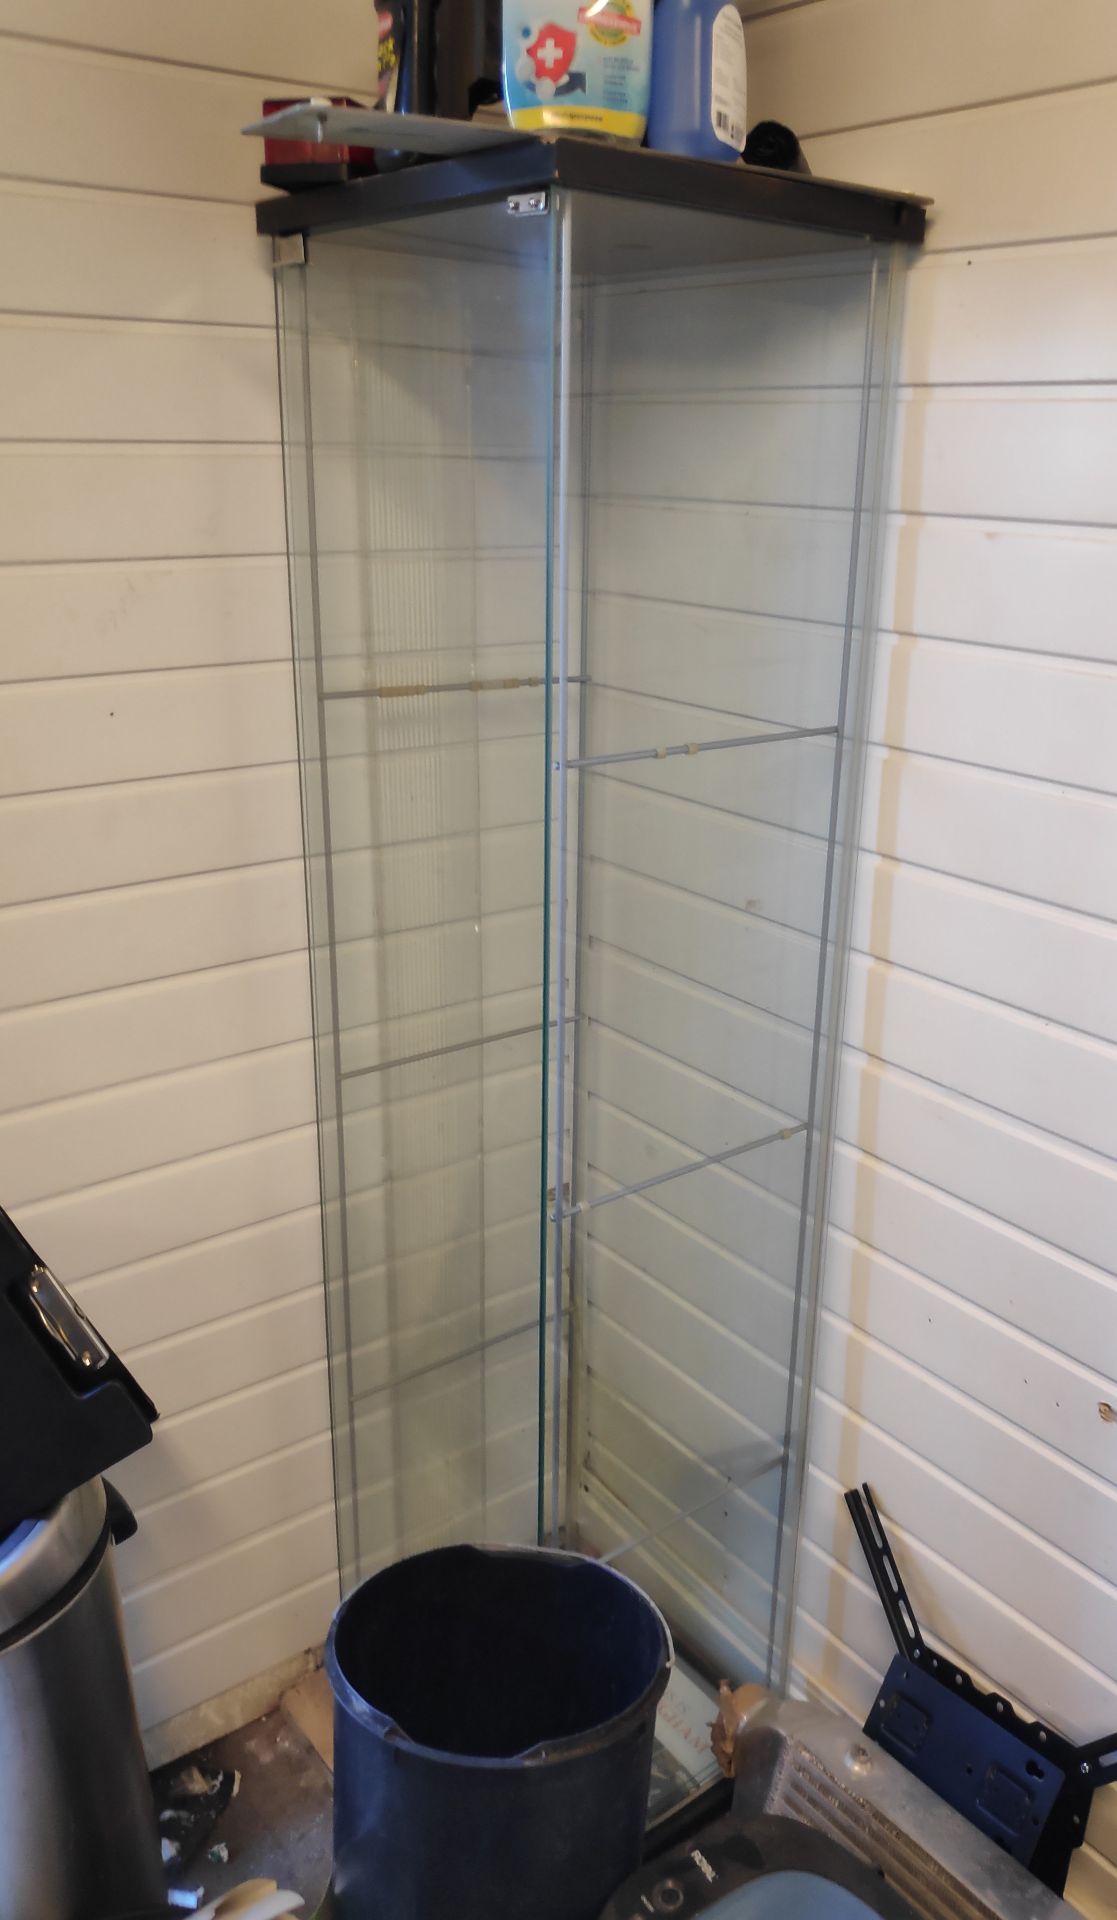 3 x Glass display Cabinets with shelves - CL682 - Location: Bedford NN29 - Image 2 of 5